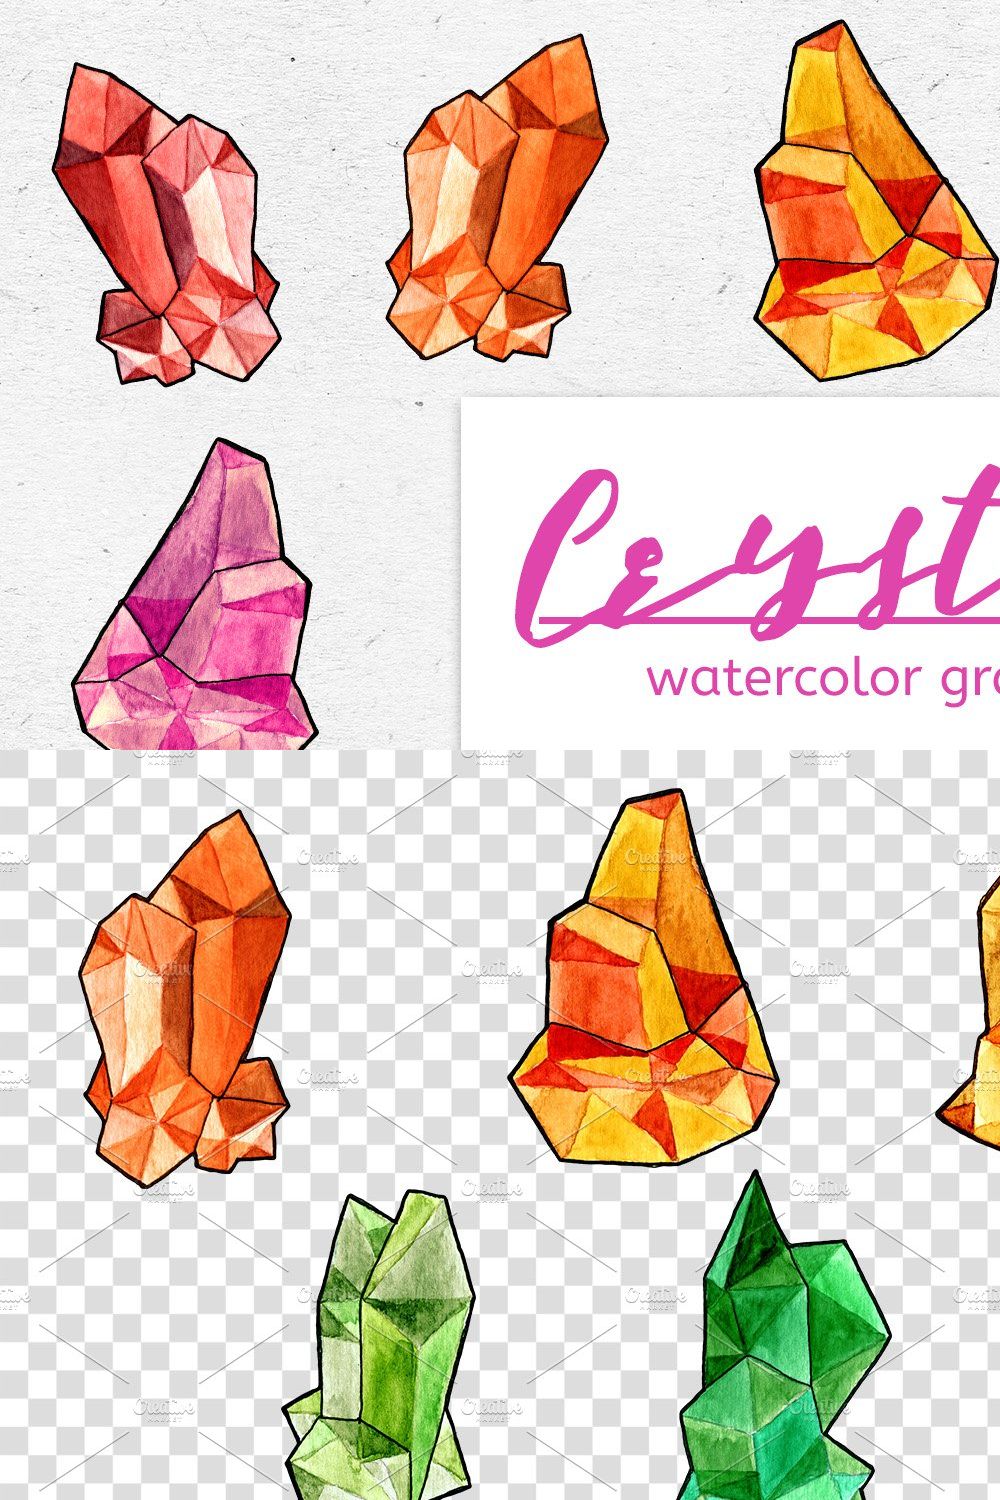 Watercolor CRYSTALS Graphic Bundle pinterest preview image.